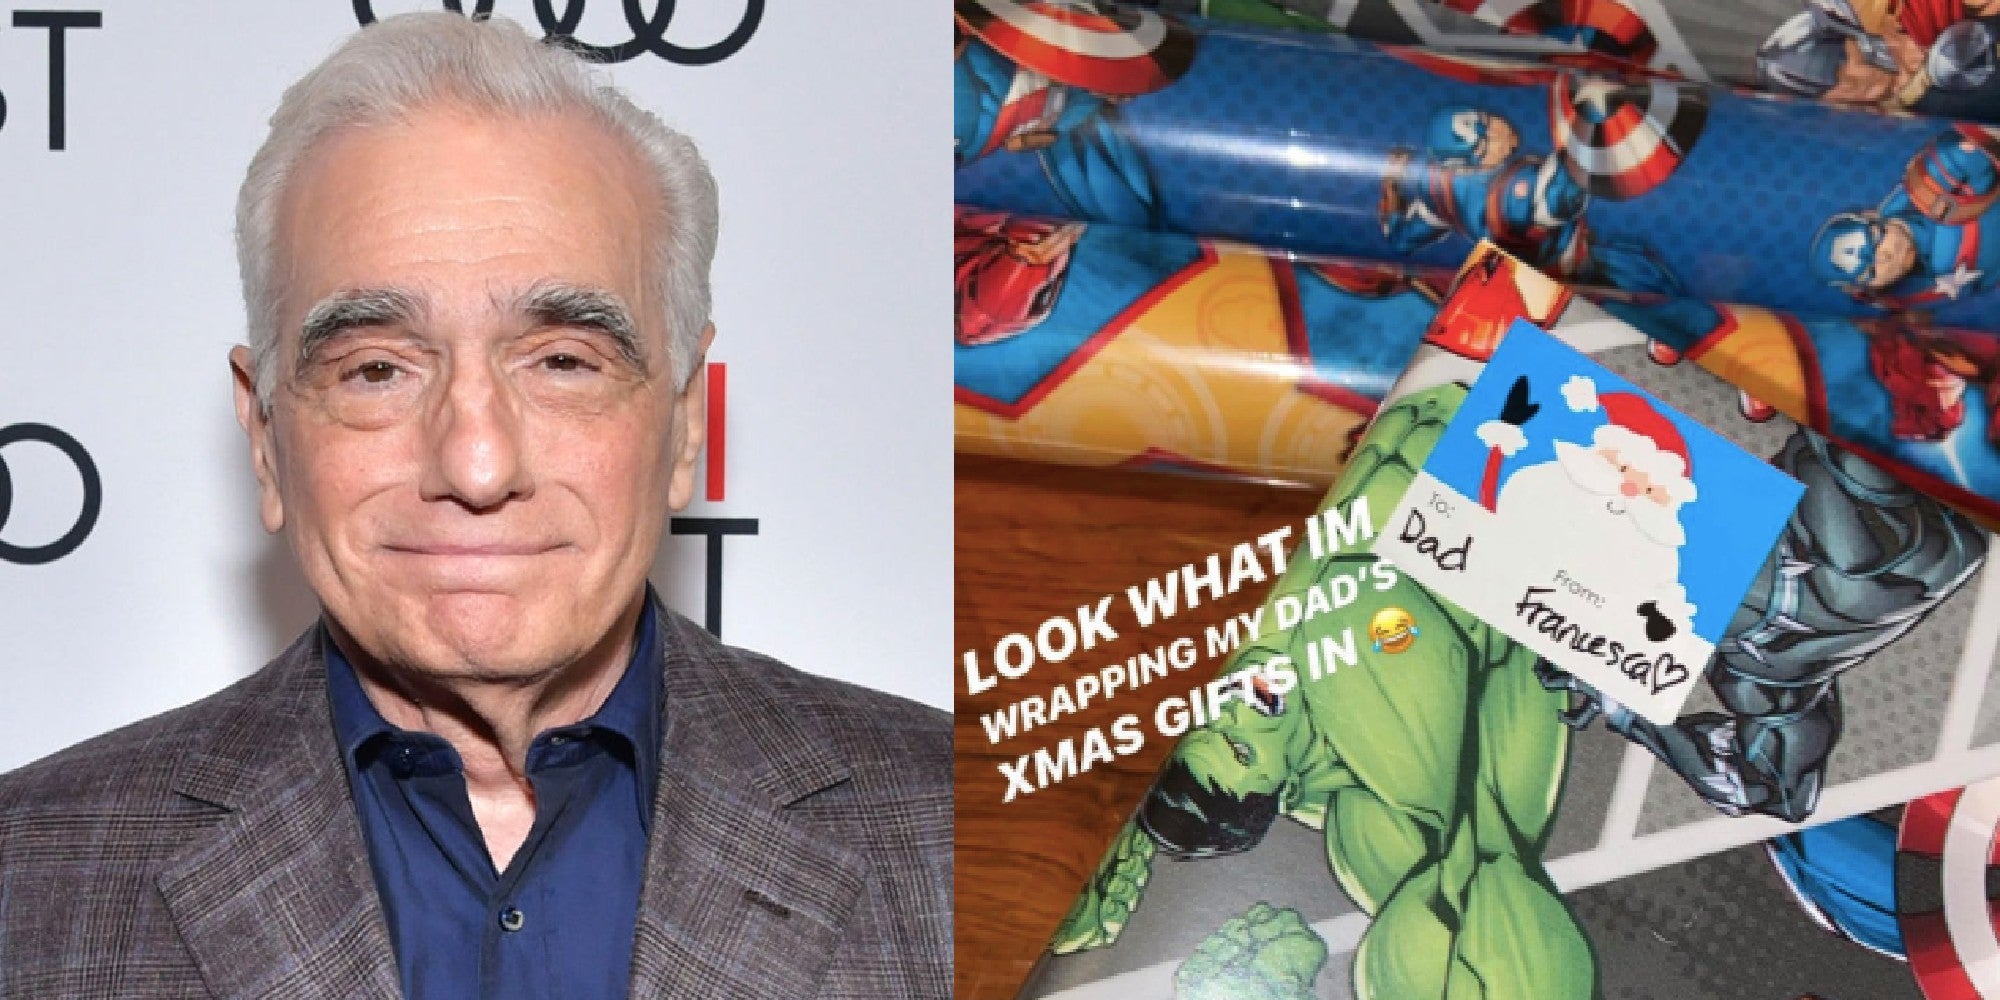 Marvel Martin Scorsese's daughter gave him a Christmas